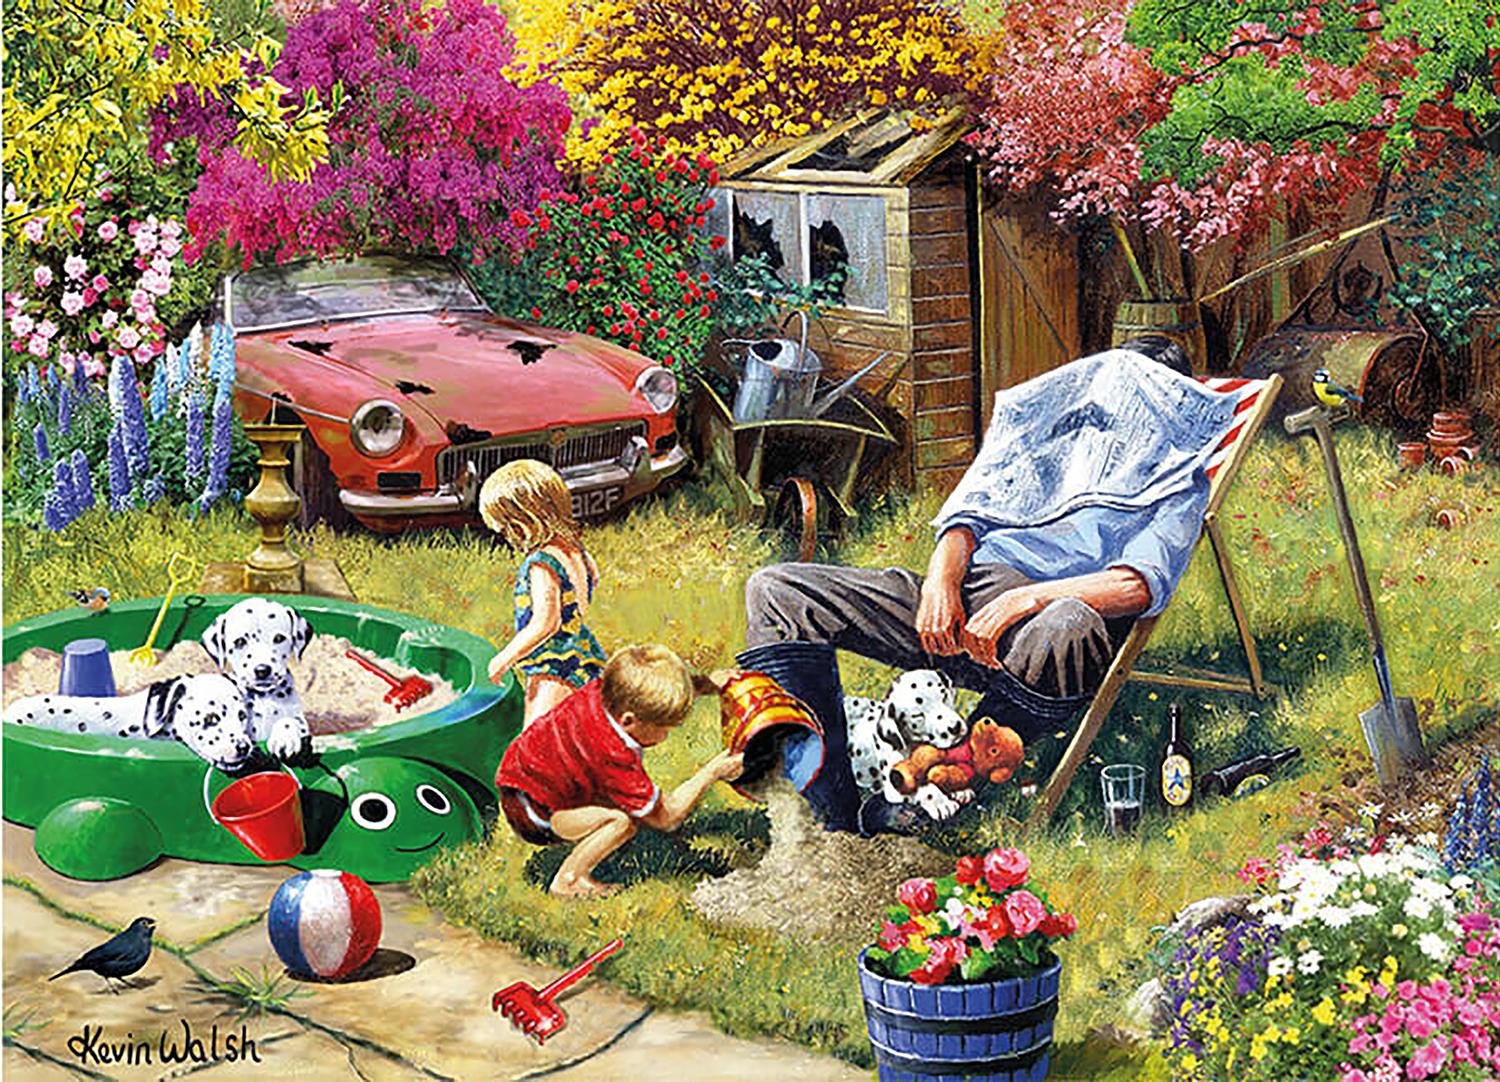 Busy In The Garden Jigsaw Puzzle (1000 Pieces)